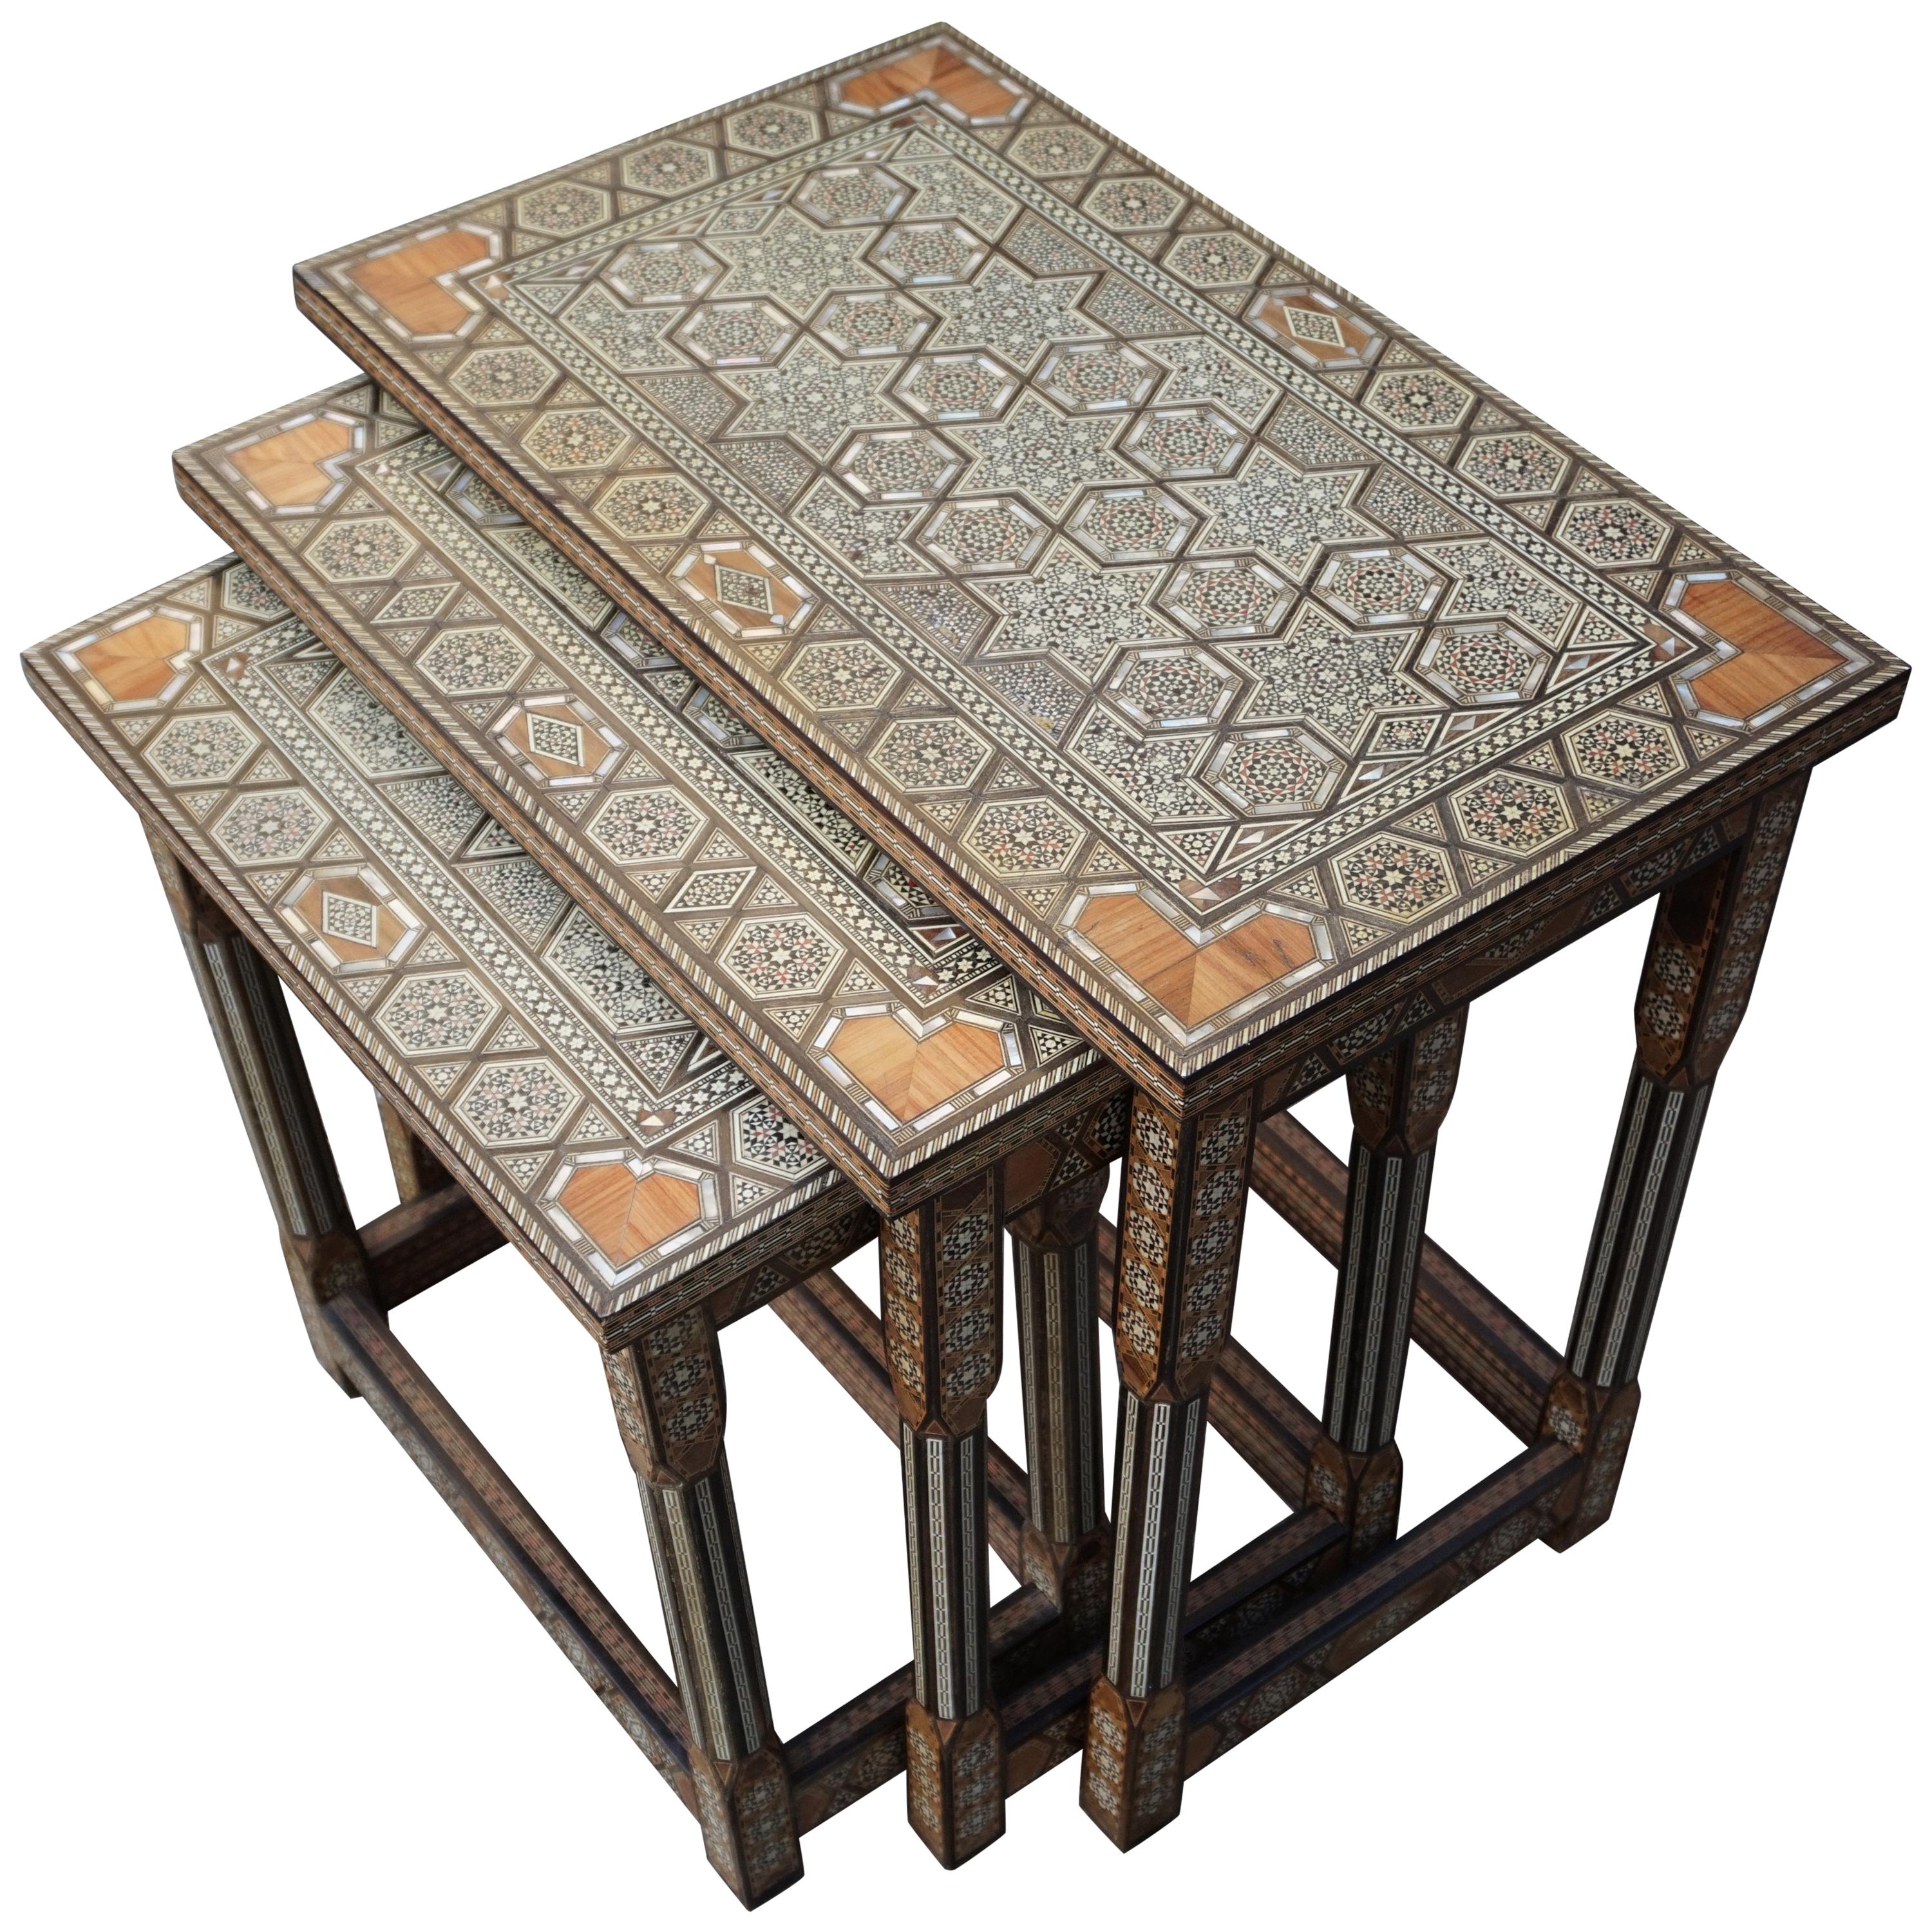 Vintage Handcrafted Moorish Nest of Tables with Amazing Number of Inlaid Motifs